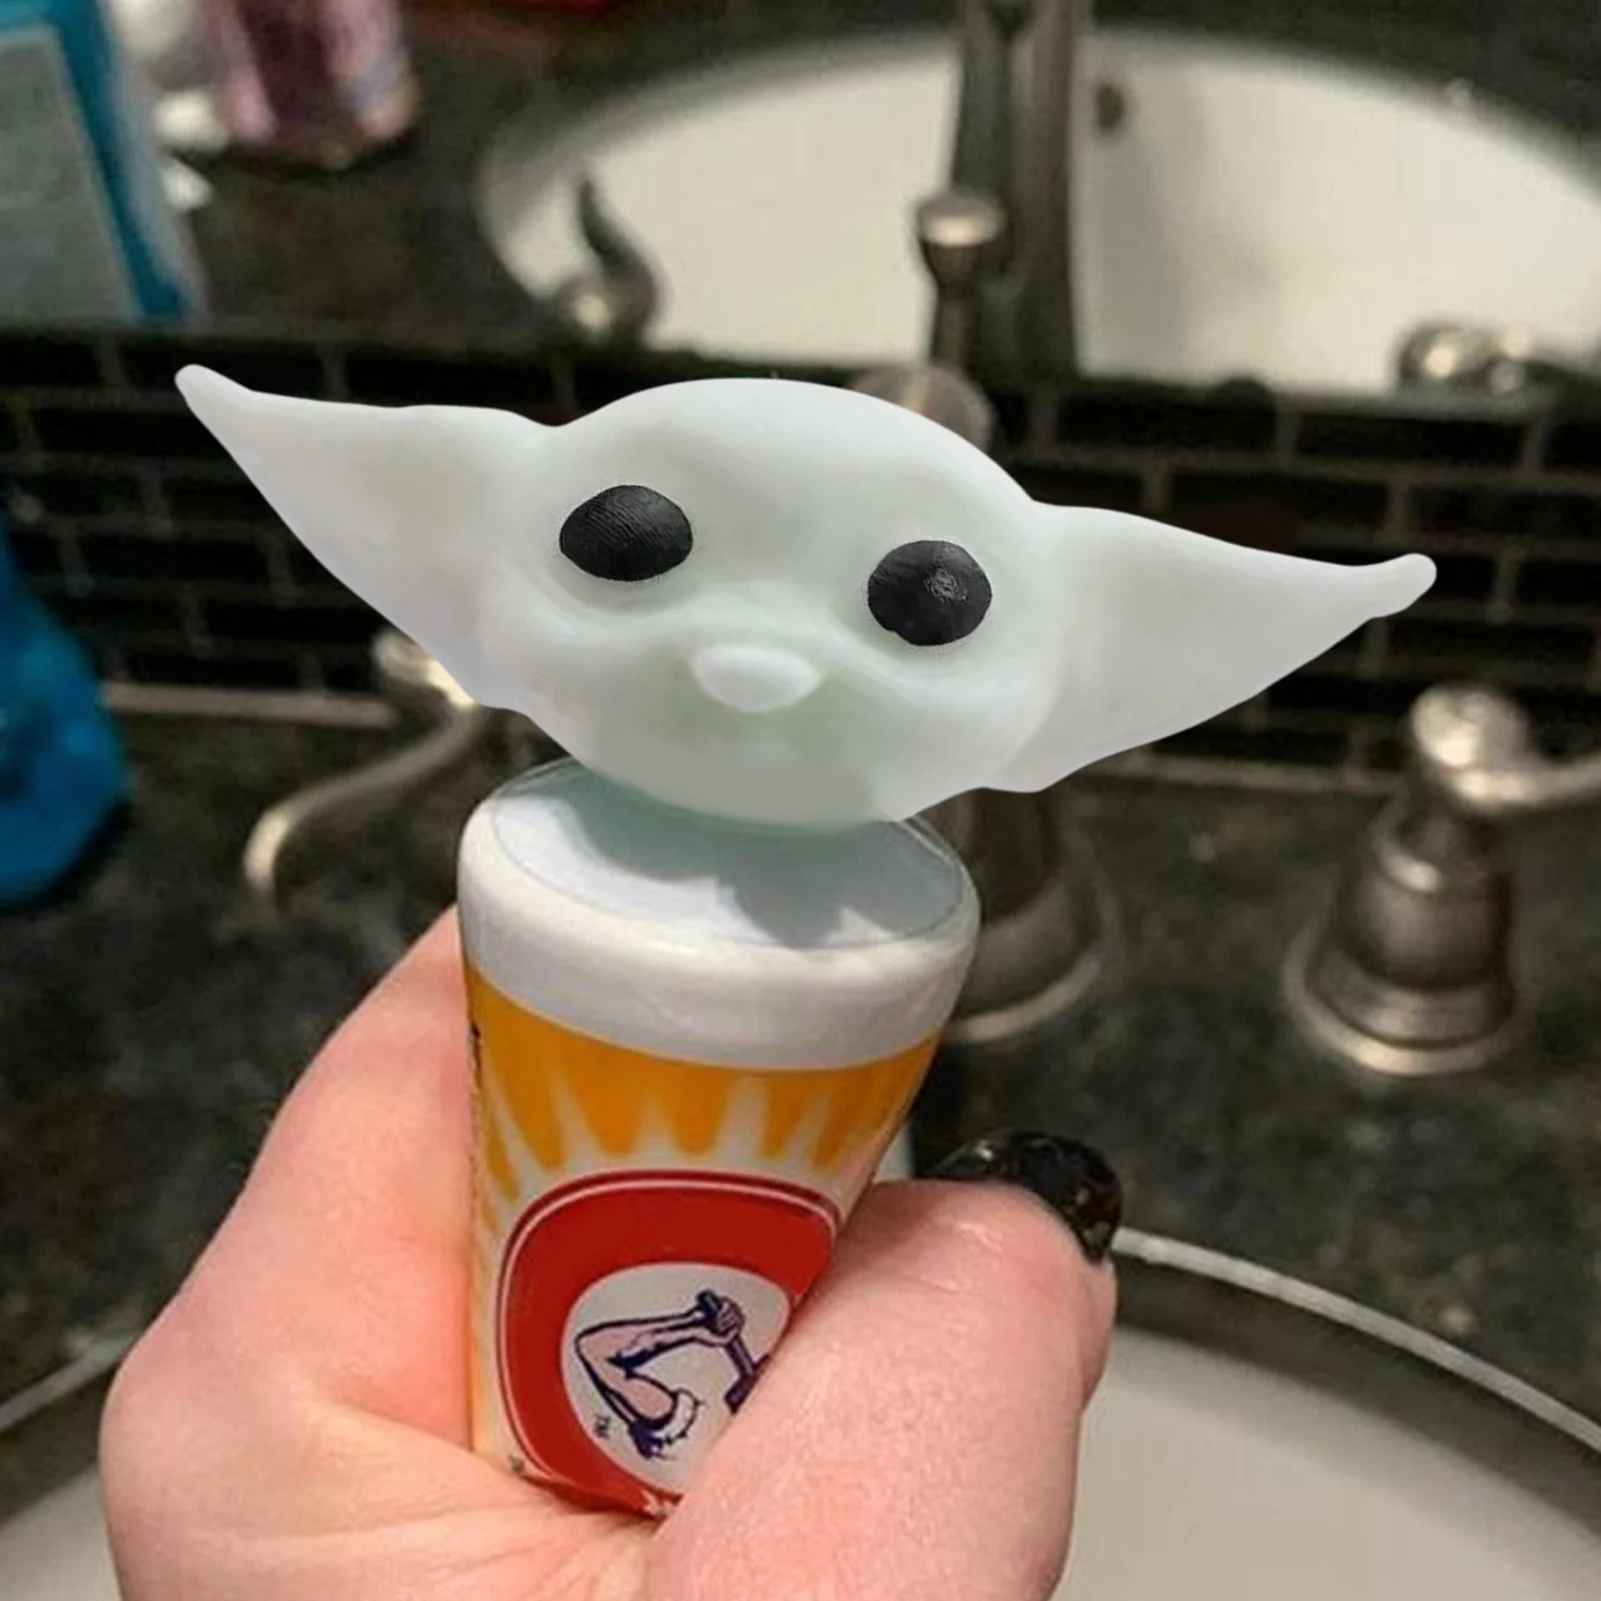 Cute Toothpaste Head Funny Toothpaste Dispenser Cartoon Toothpaste Squeezer Novelty Bathroom Accessories Household For Children